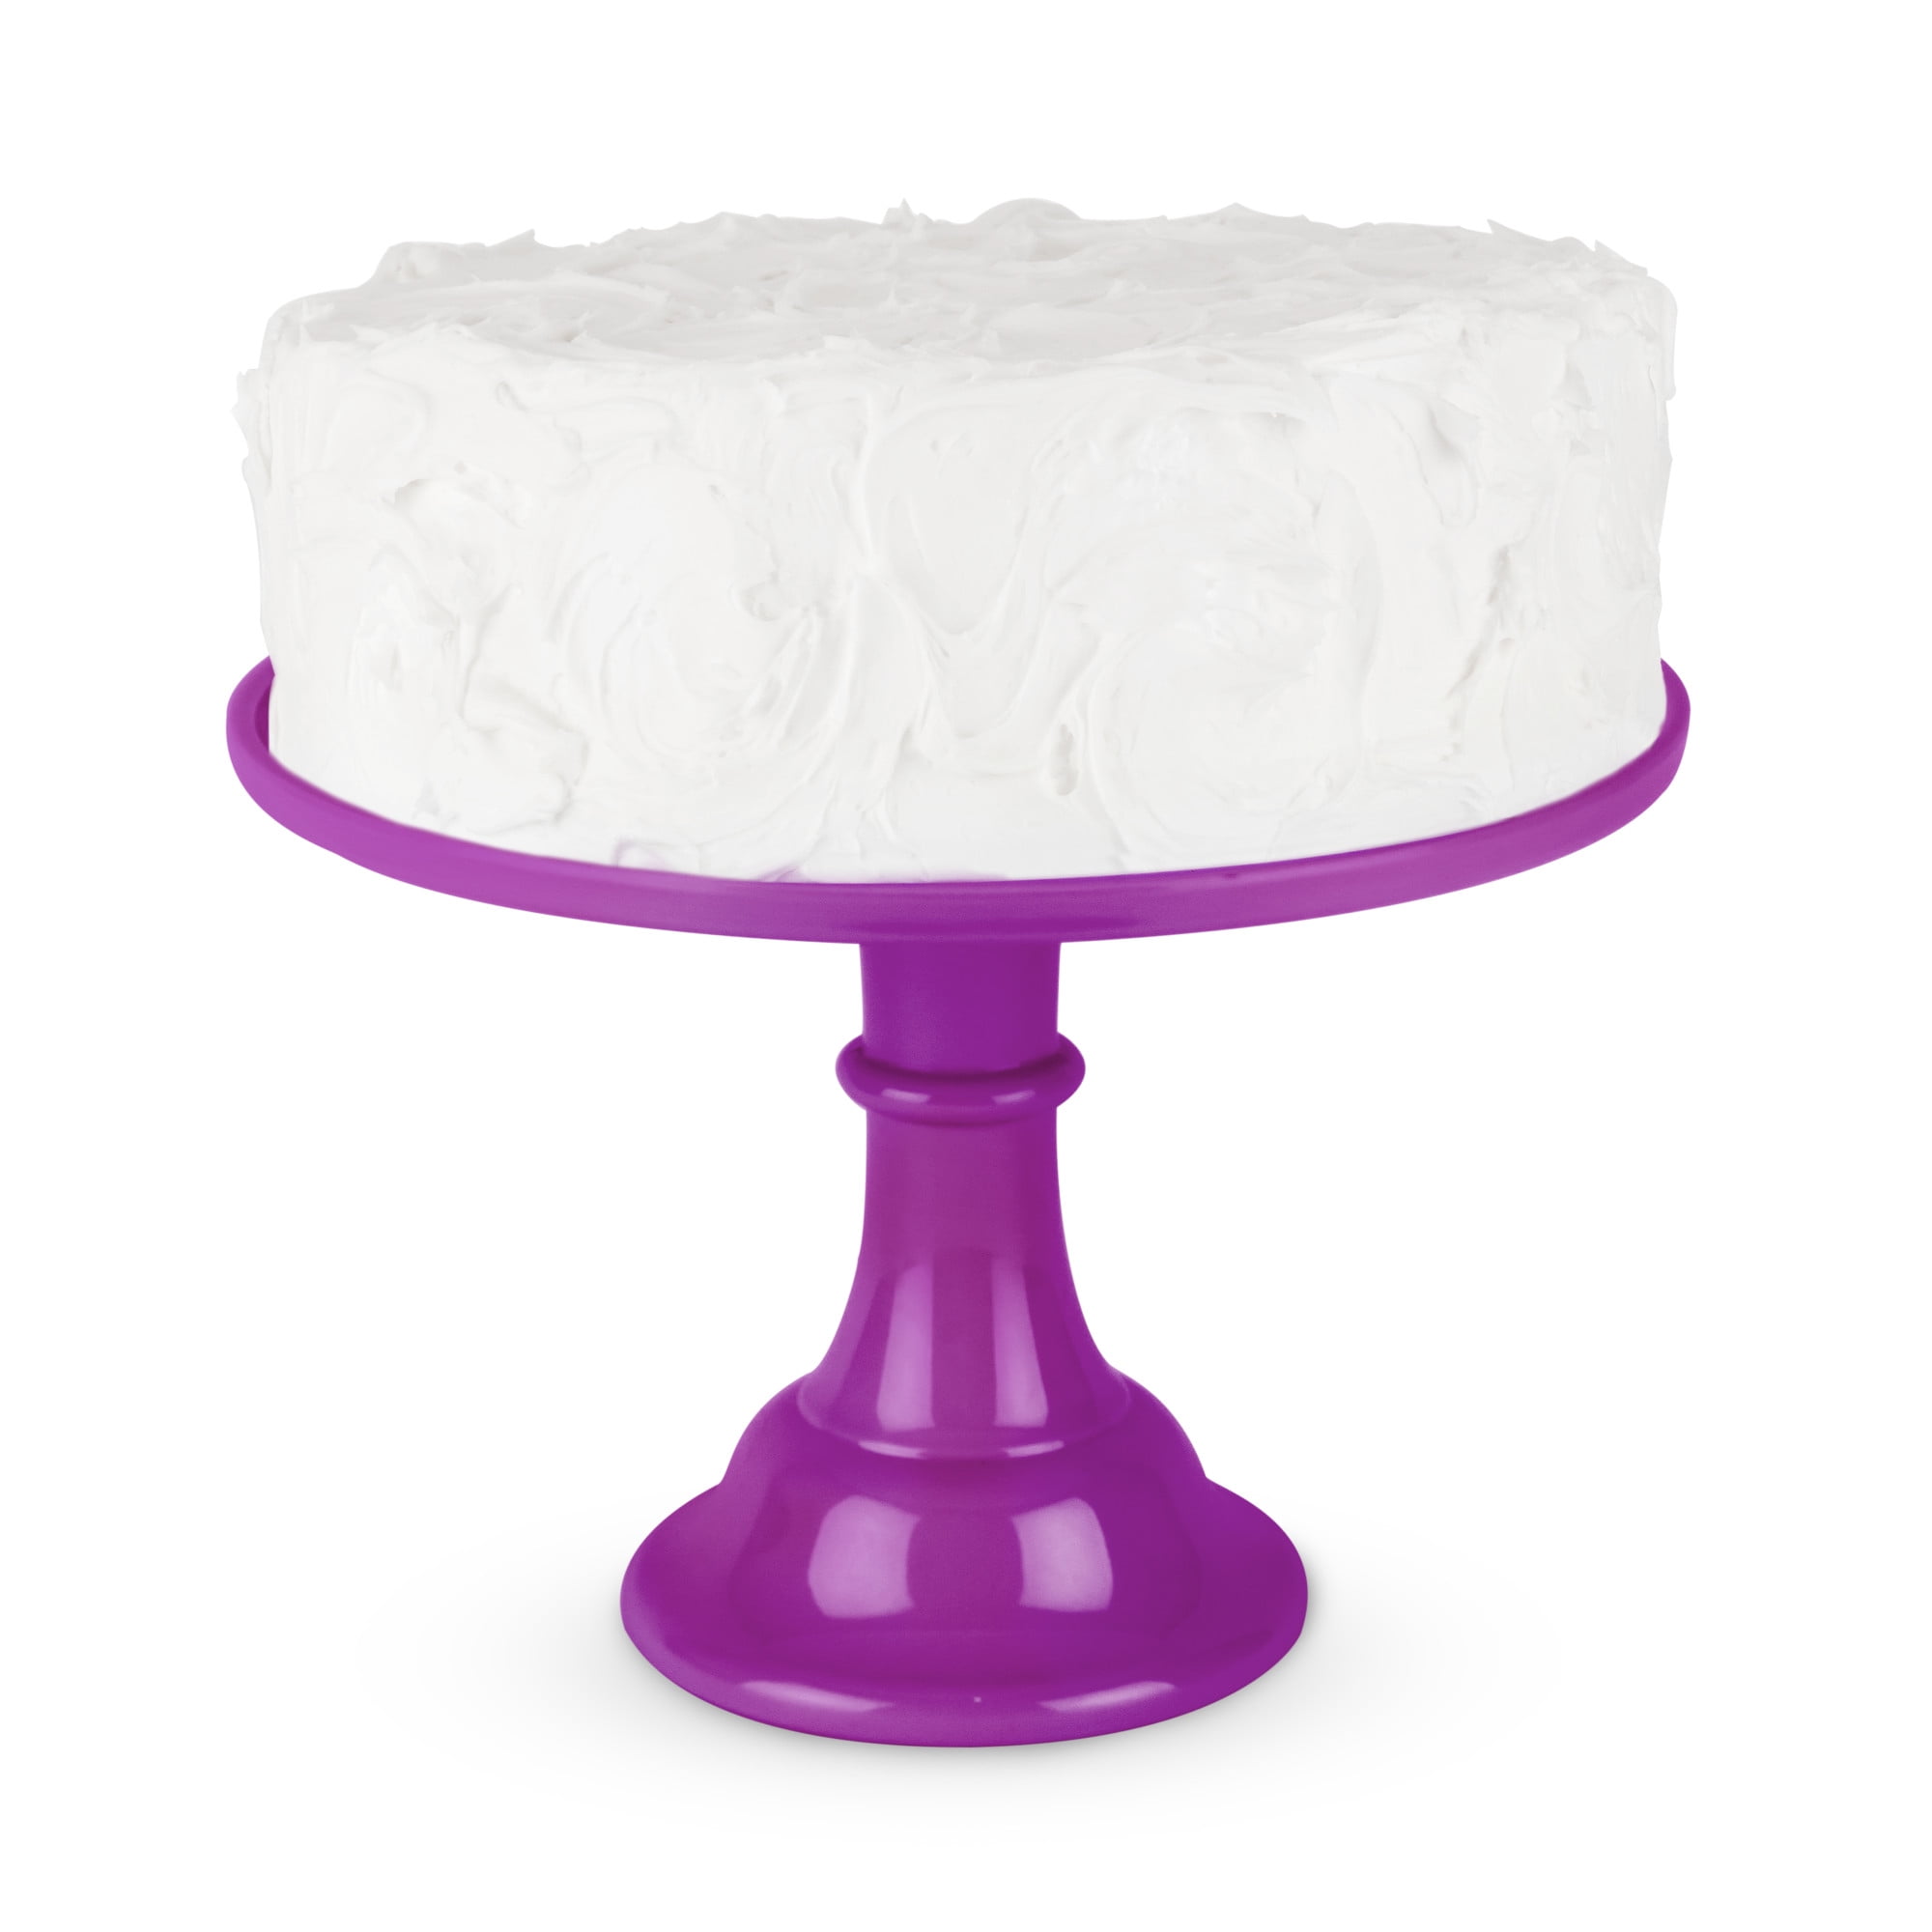 14 Plastic Cake Top Base stand 4.5" x 2.5" tall accessory 